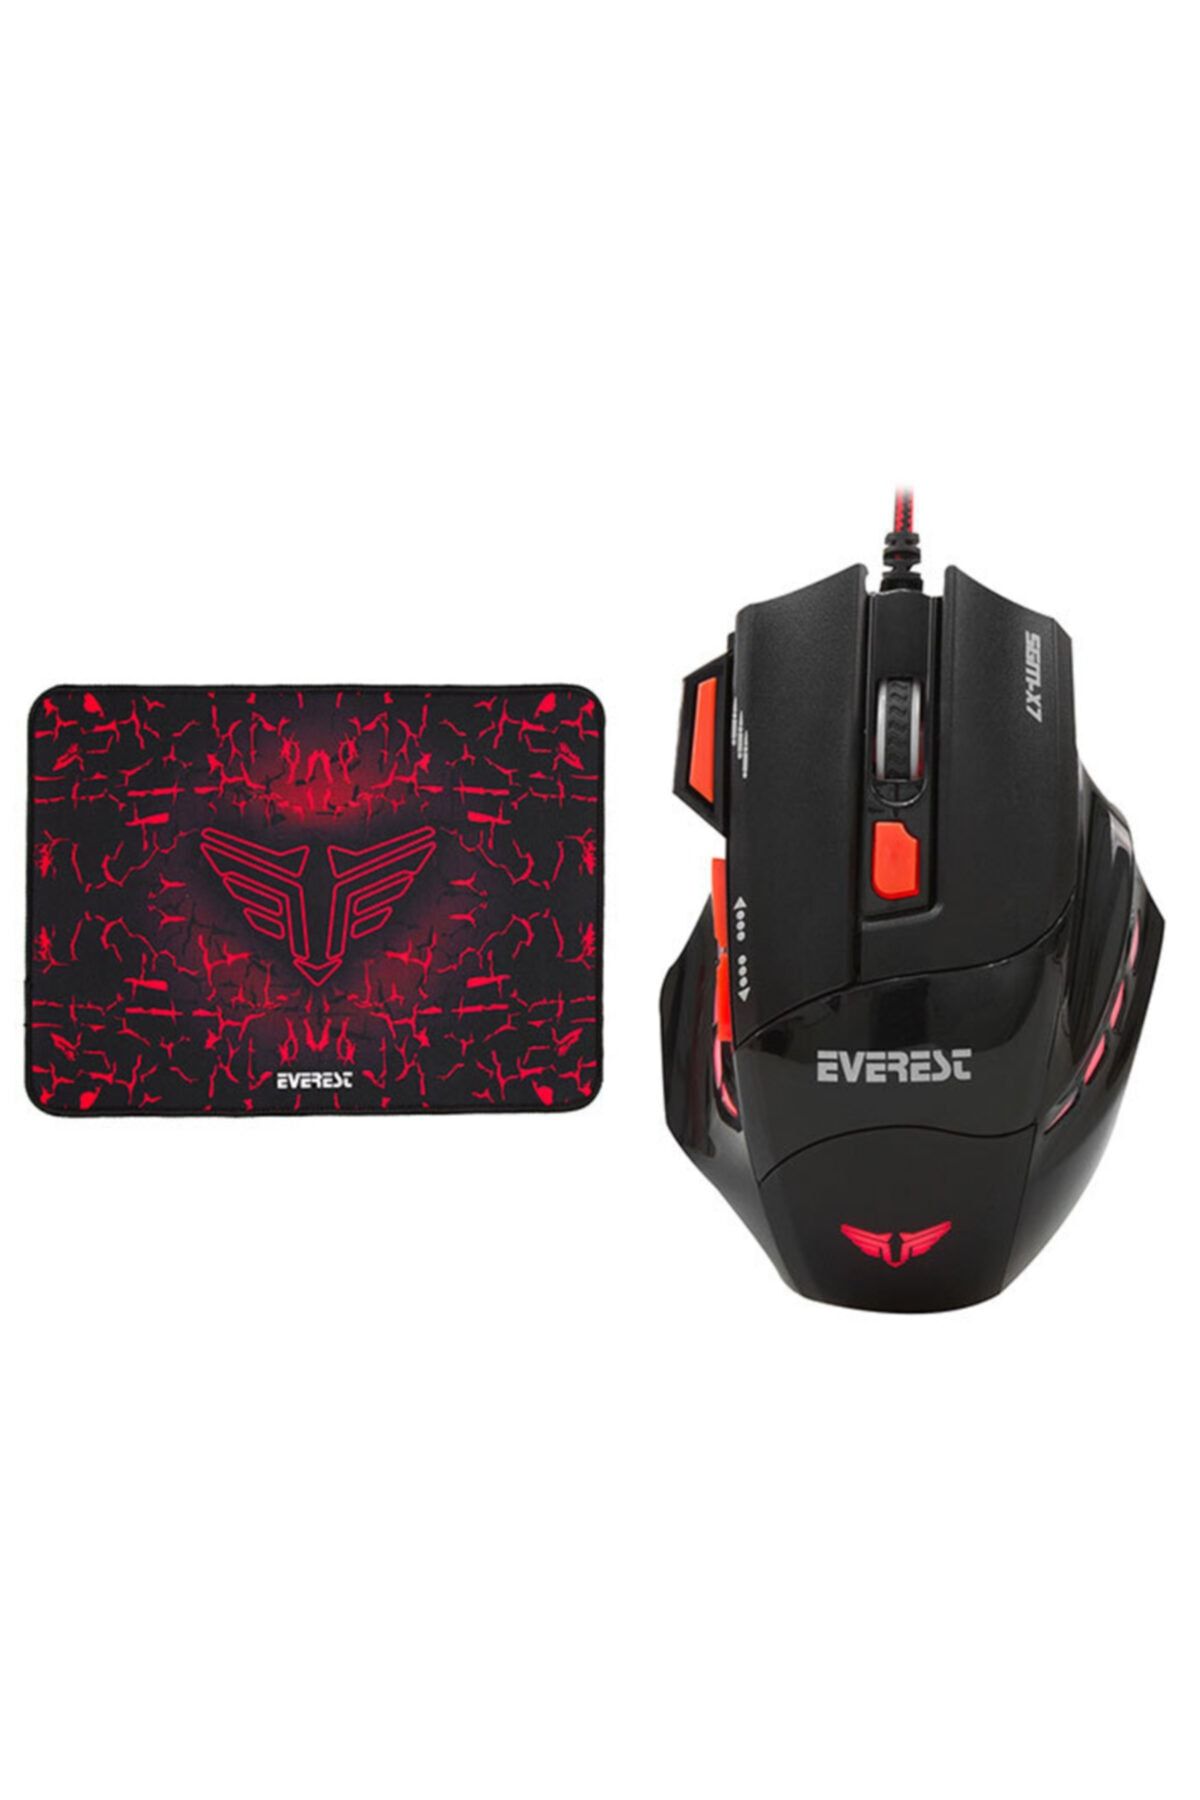 Everest Sgm-x7 Usb Siyah 2in1 7200dpi Makrolu Oyuncu Mouse +gaming Mouse Pad